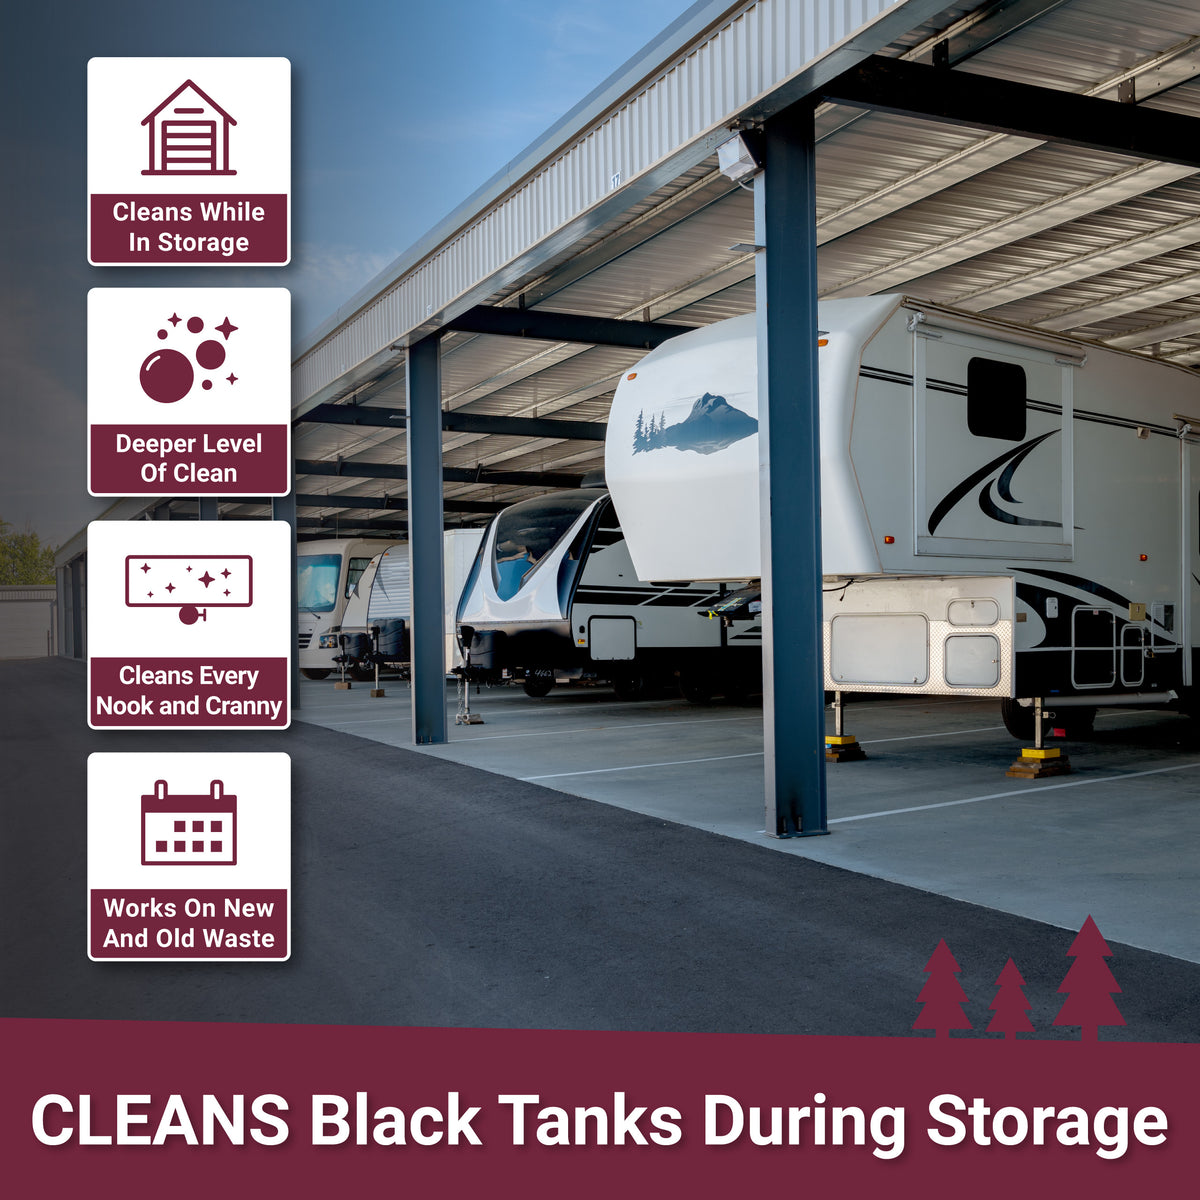 Cleans Black Tanks During Storage. Works on Old Problems and New. Unique Camping + Marine